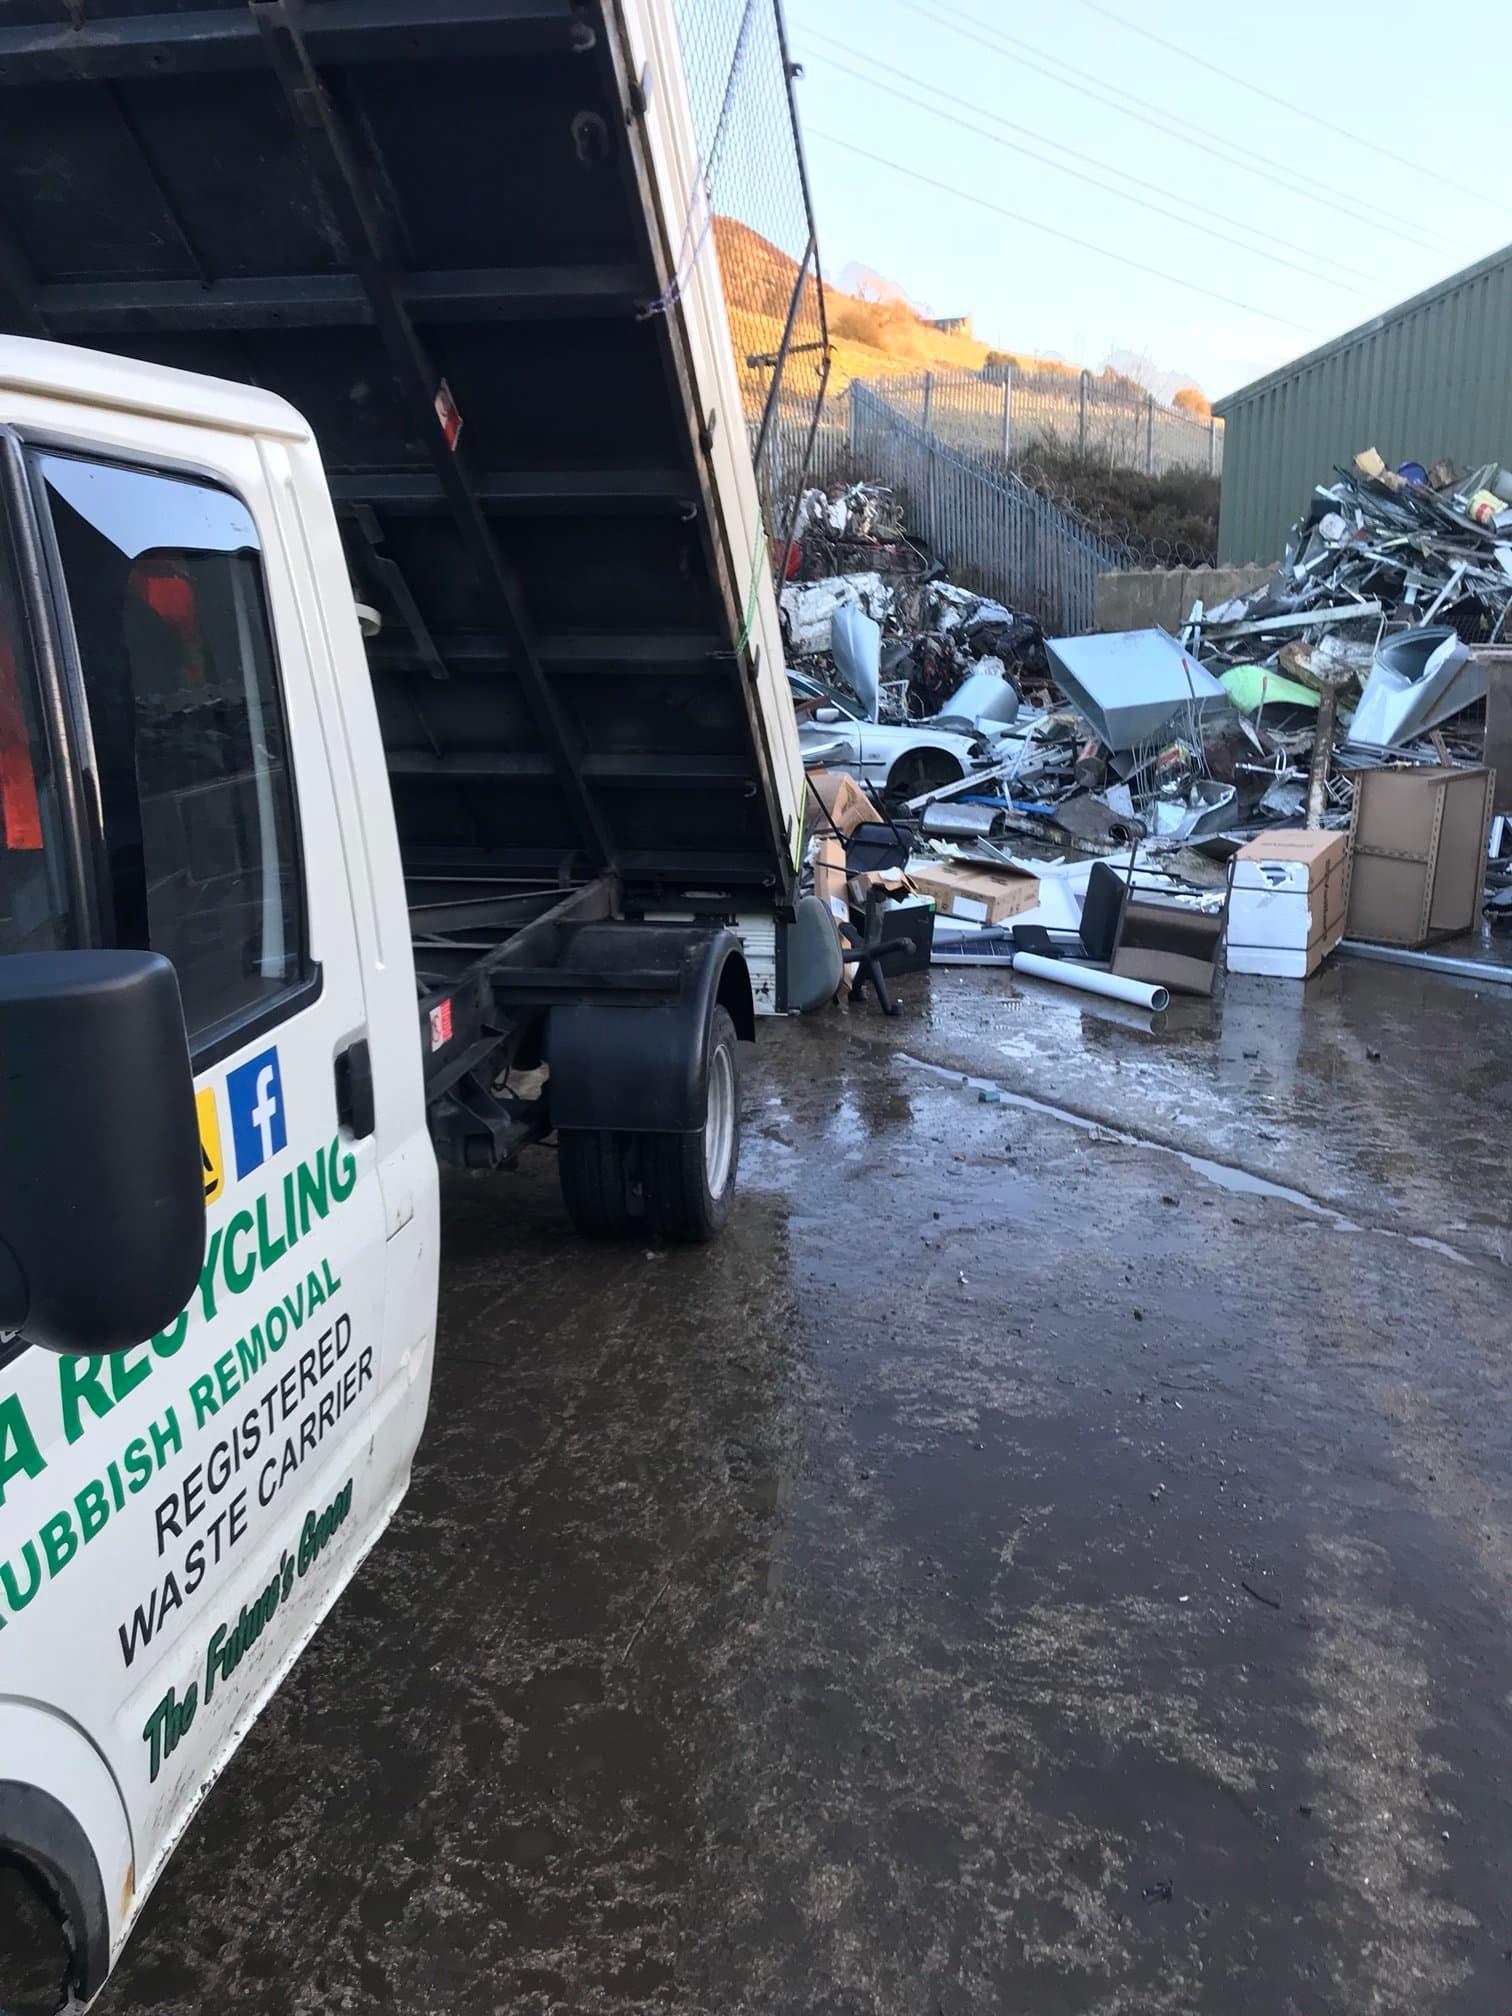 MBA Recycling Ltd House Clearance & Rubbish Removal Bradford 07923 231785